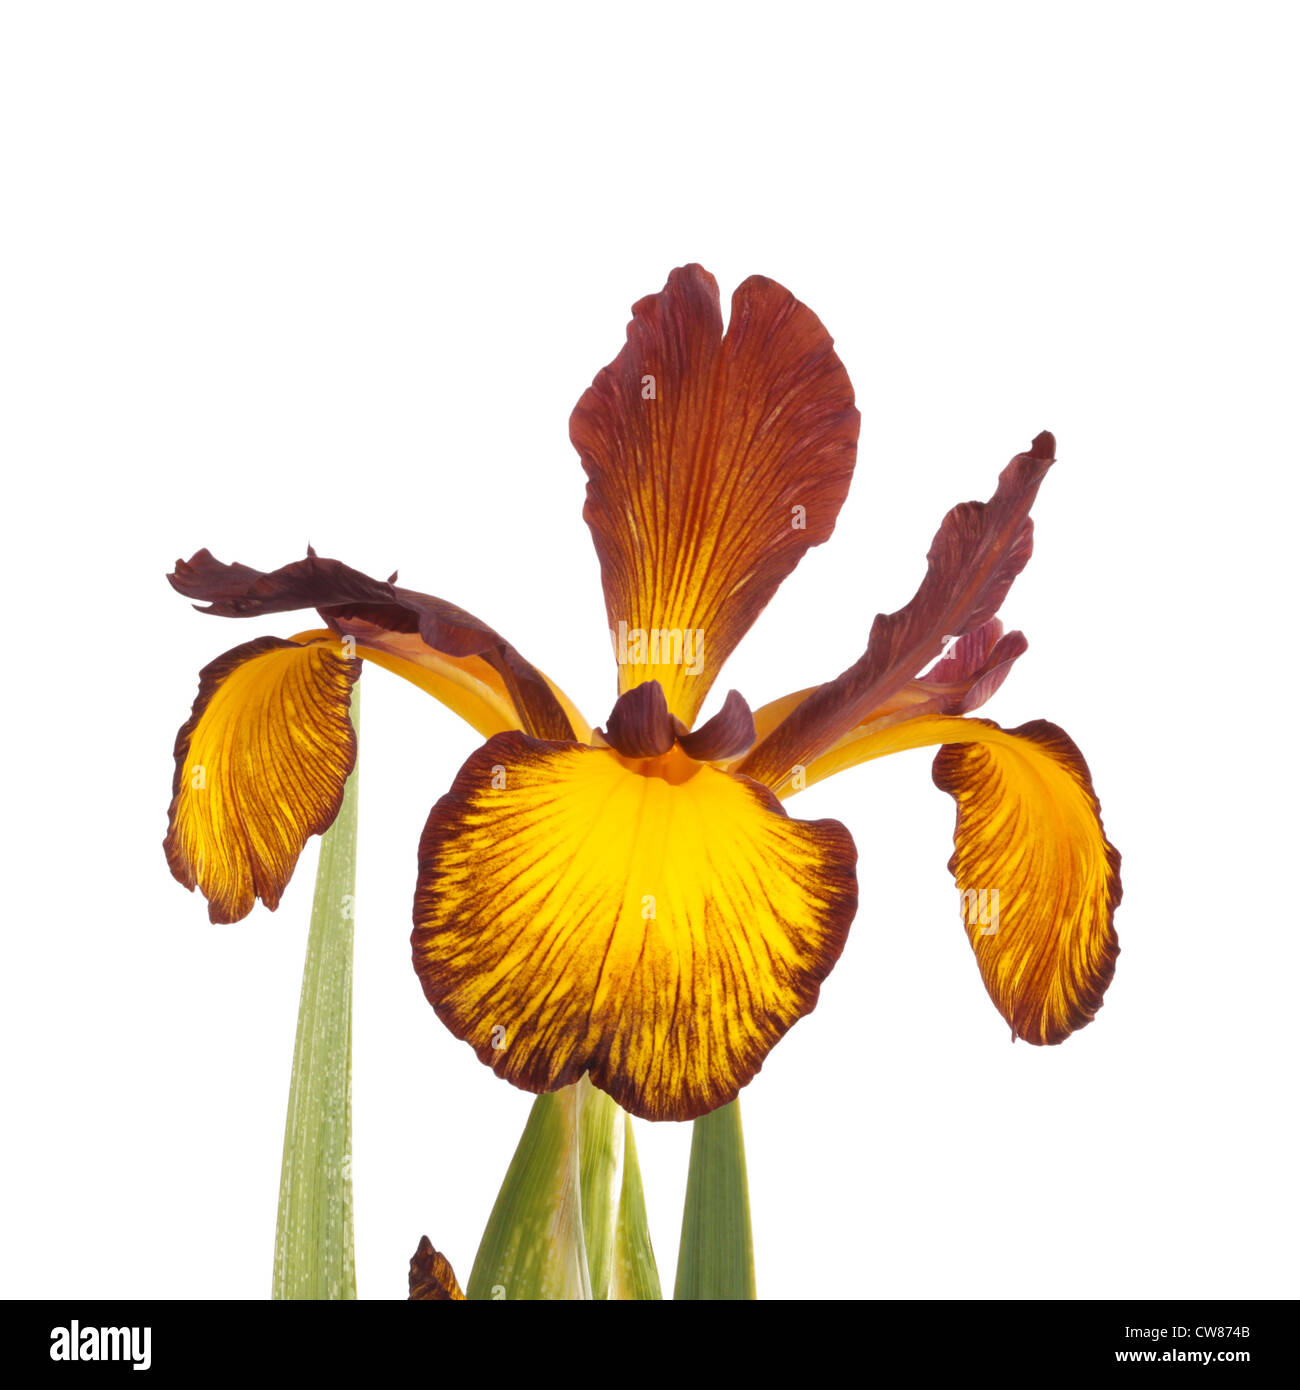 Stem with an open flower of a yellow and brown Spuria iris isolated against a white background Stock Photo